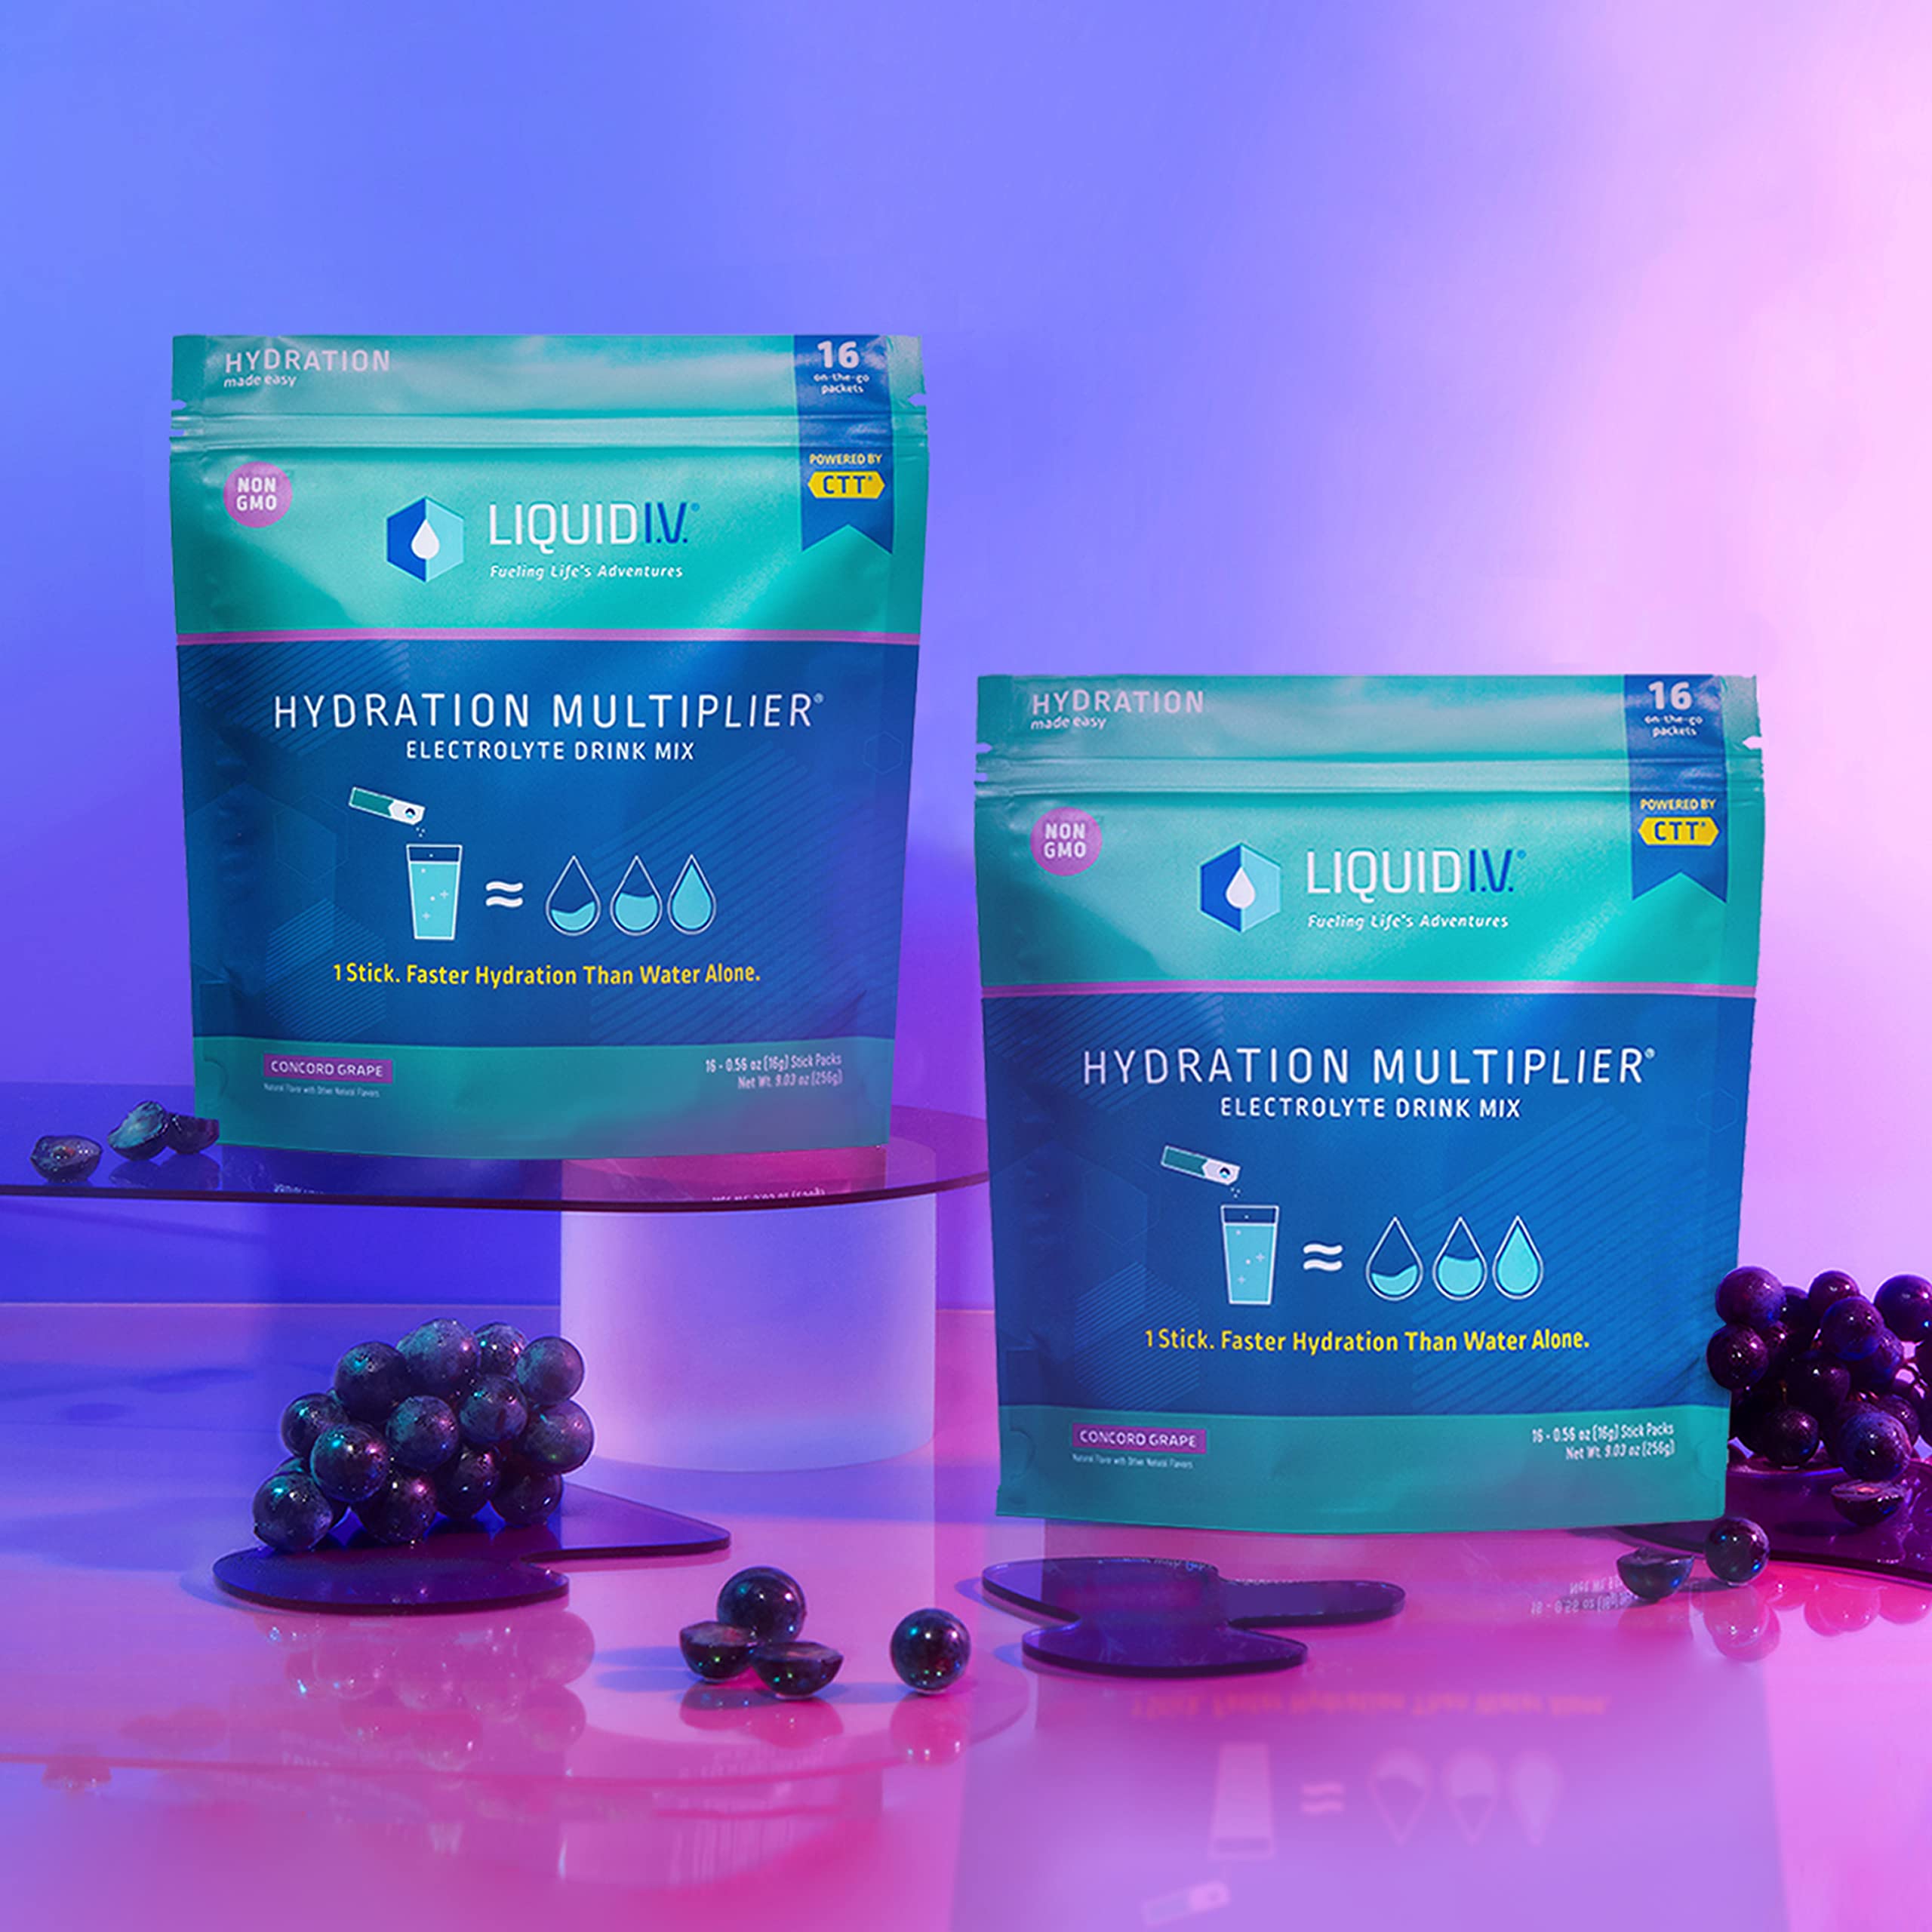 Liquid I.V. Hydration Multiplier - Concord Grape - Hydration Powder Packets | Electrolyte Drink Mix | Easy Open Single-Serving Stick | Non-GMO | 16 Sticks